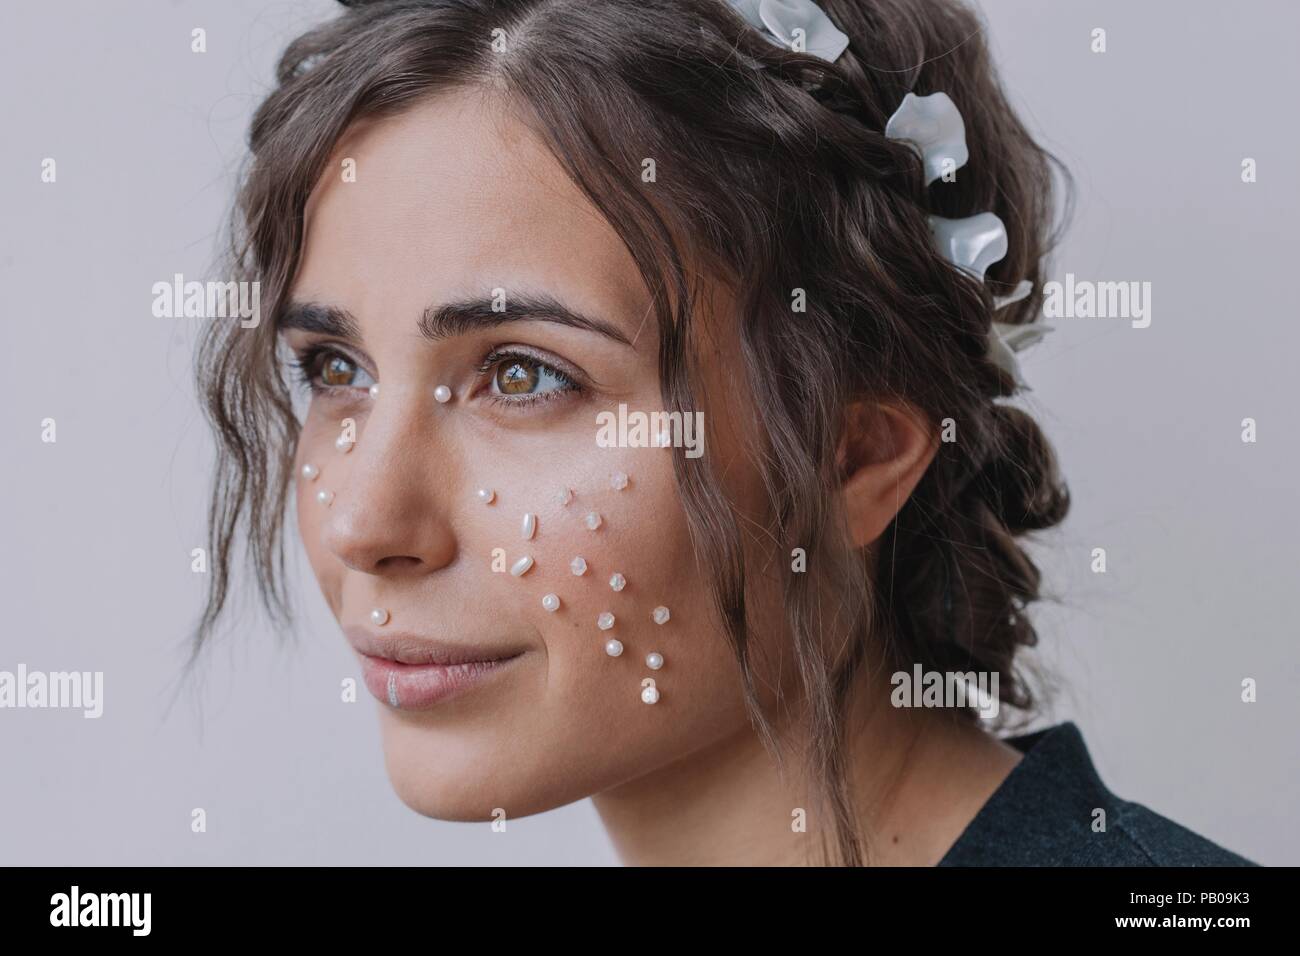 Portrait of a smiling woman with pearls on her face Stock Photo